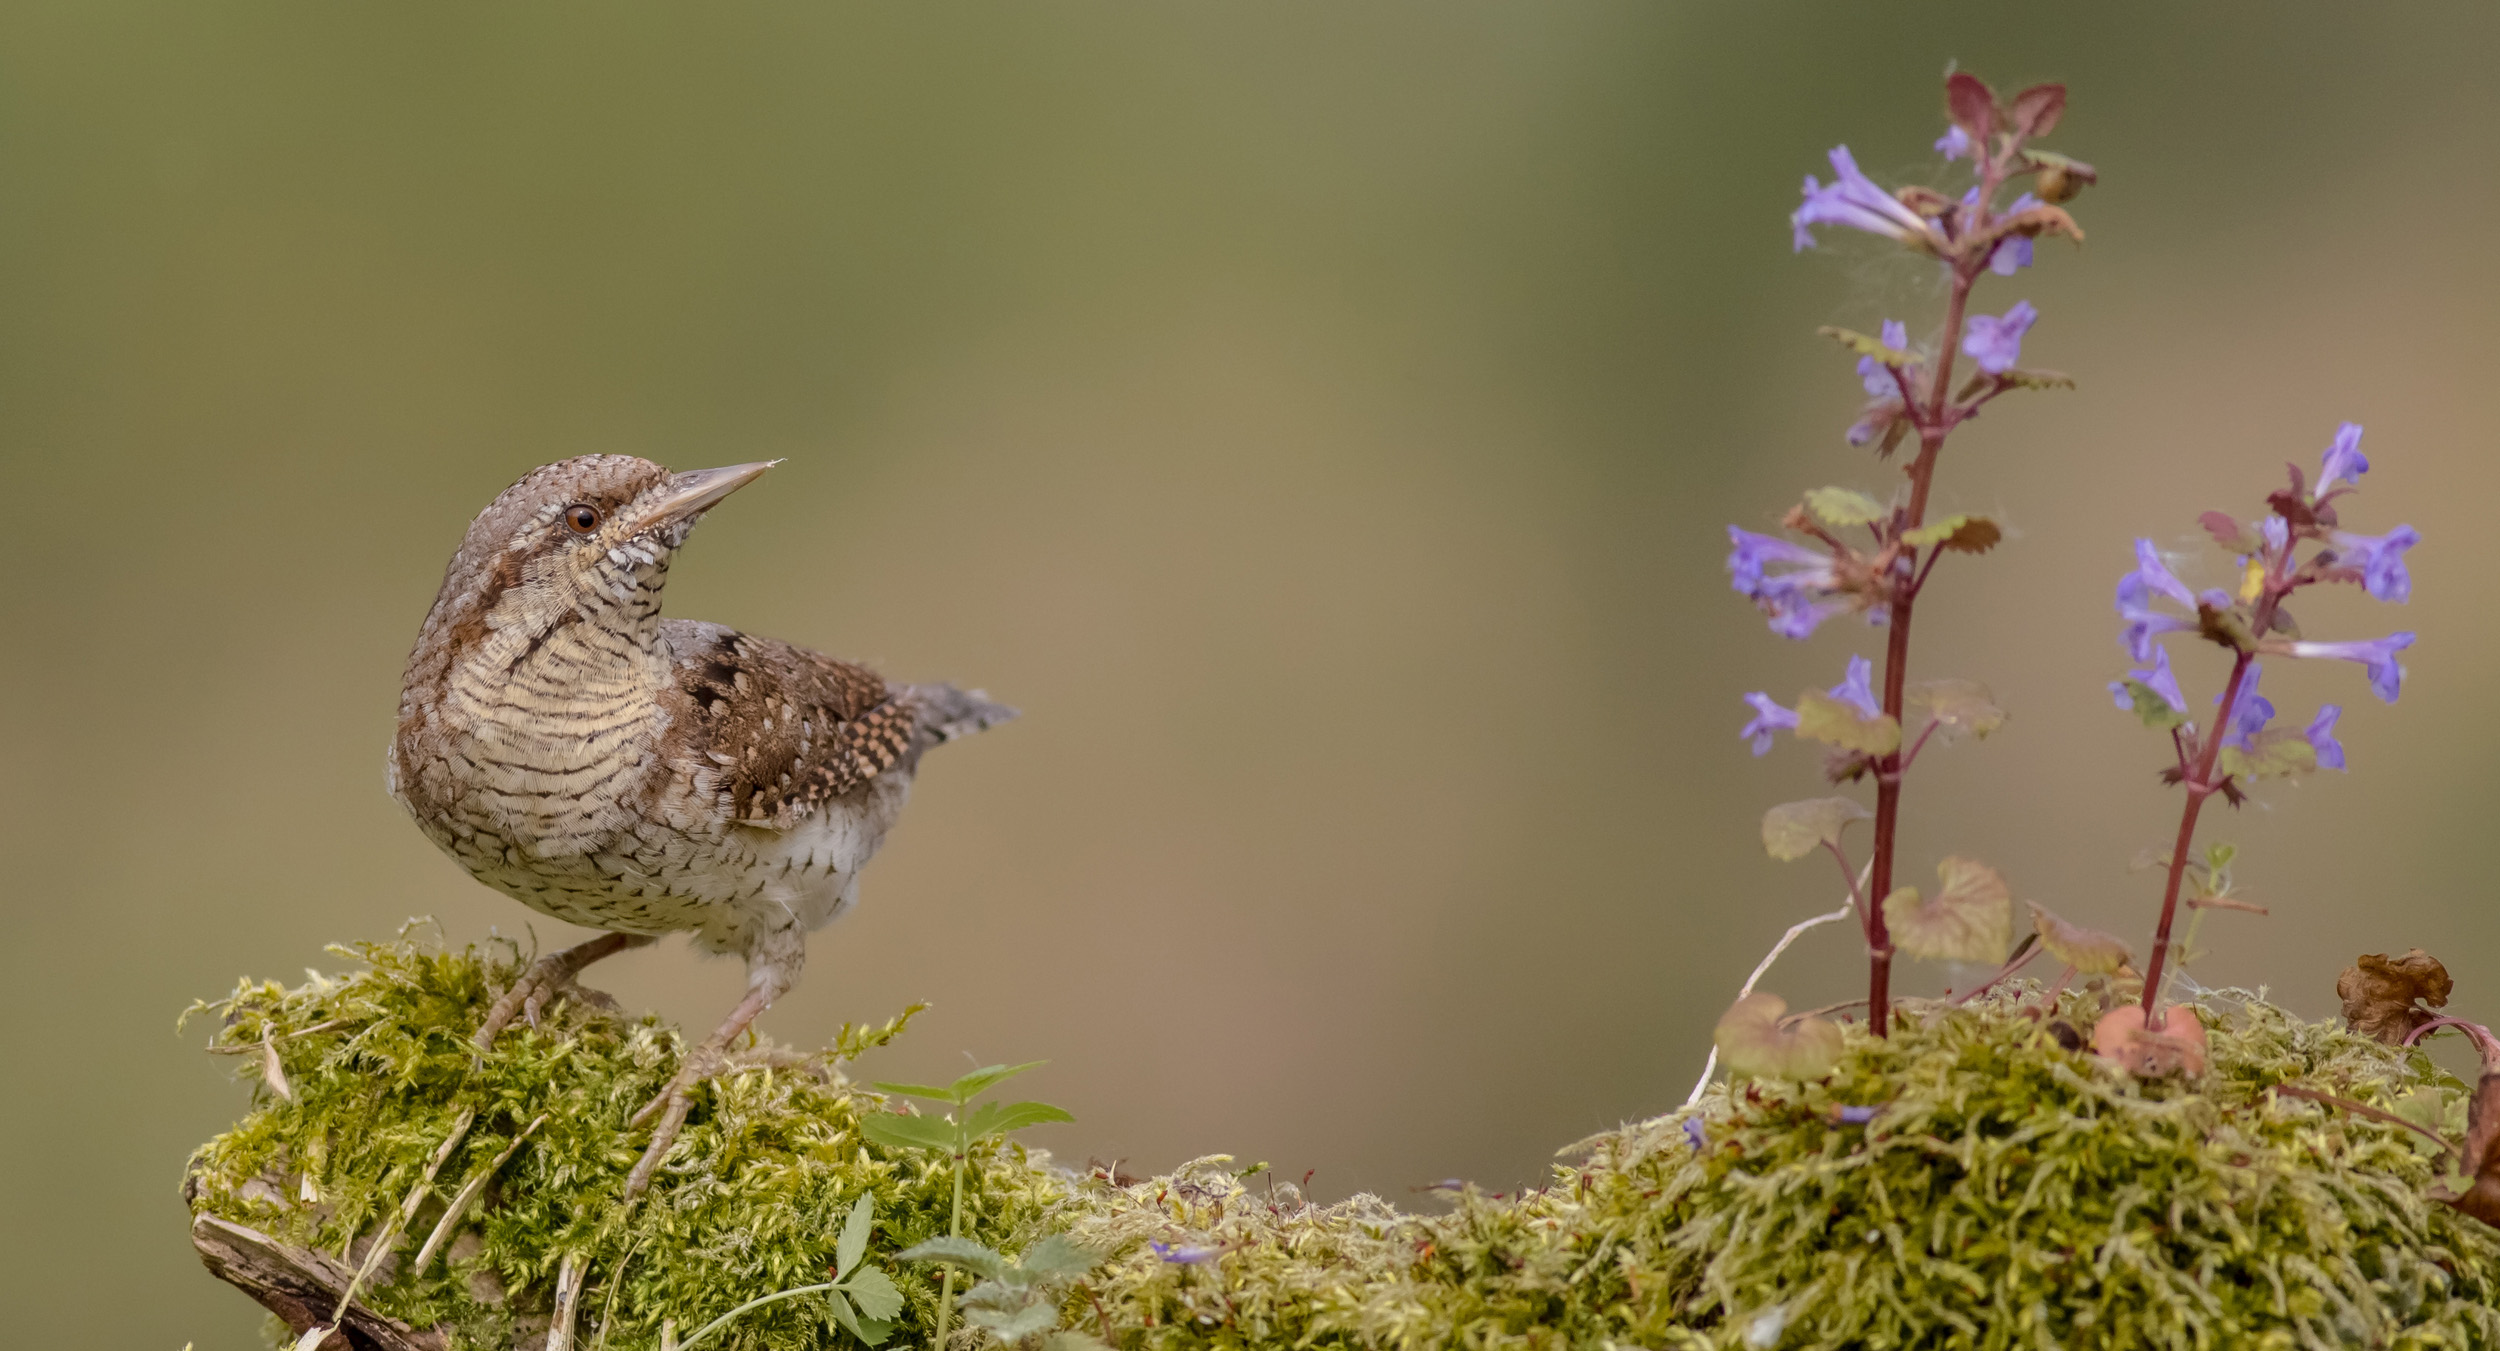 A lone Wryneck looking towards purple flowers whilst perched on a moss covered log.